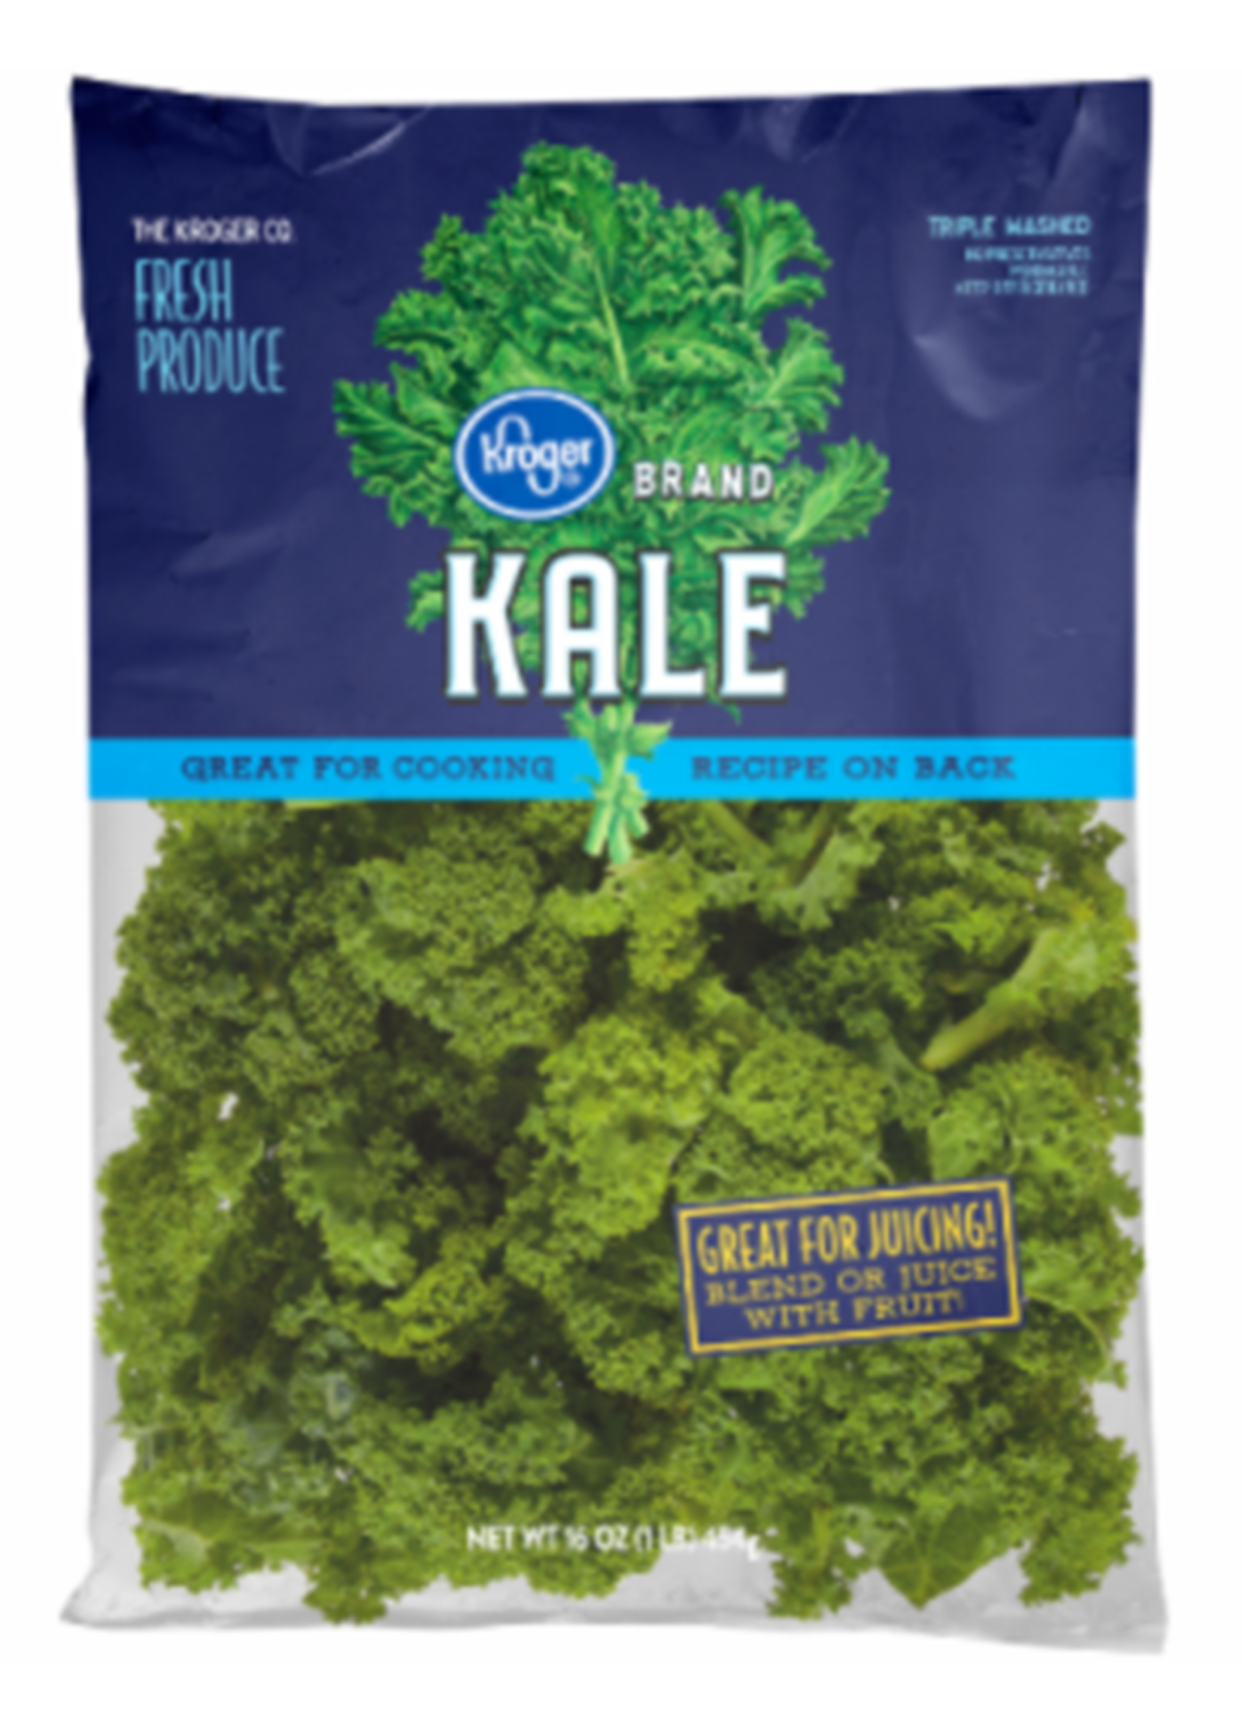 One-pound bags of Kroger-brand kale are among the recall.  (FDA)